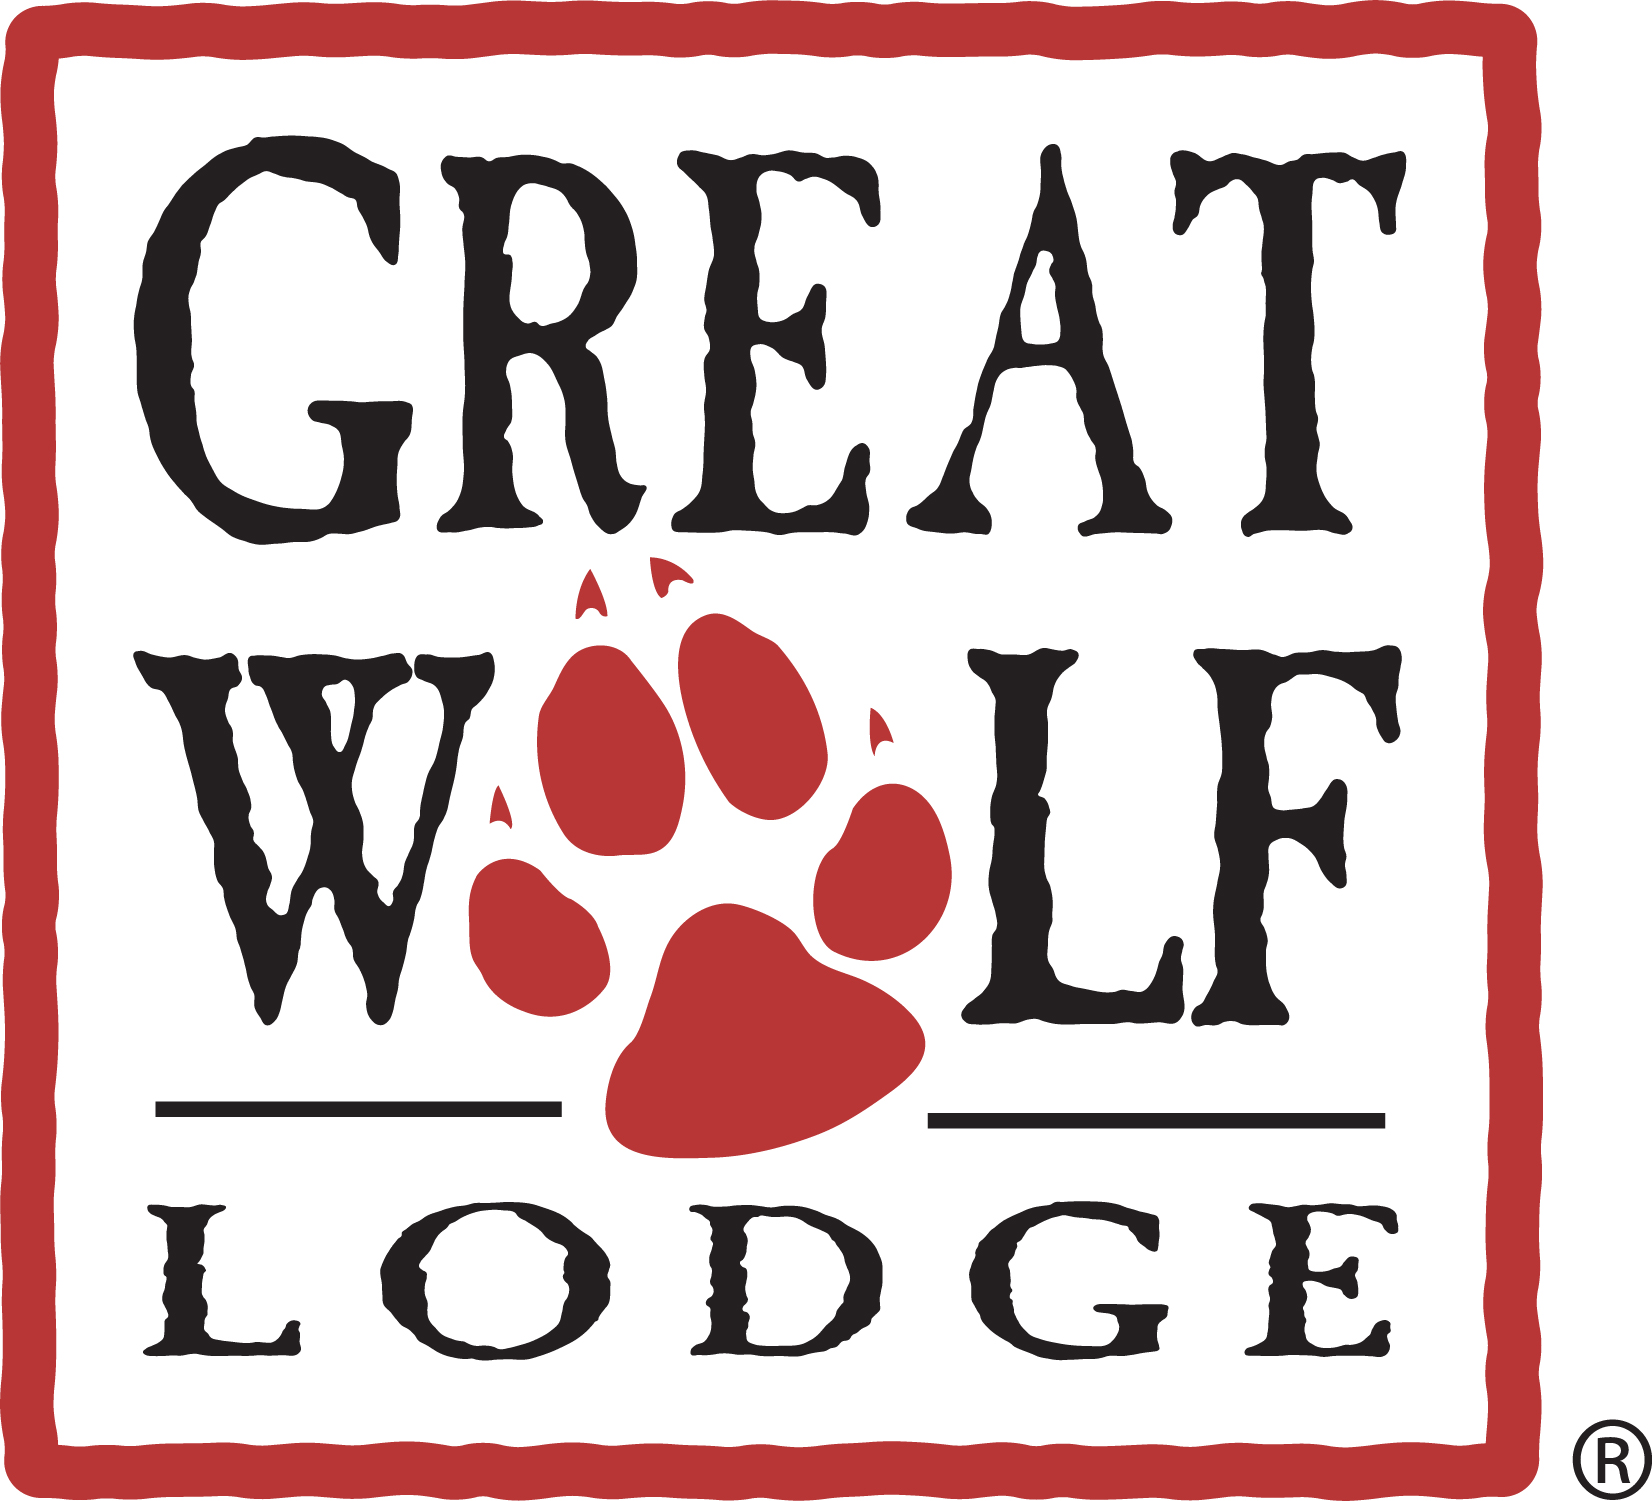 Apollo Acquires Great Wolf Lodge Amusement Today